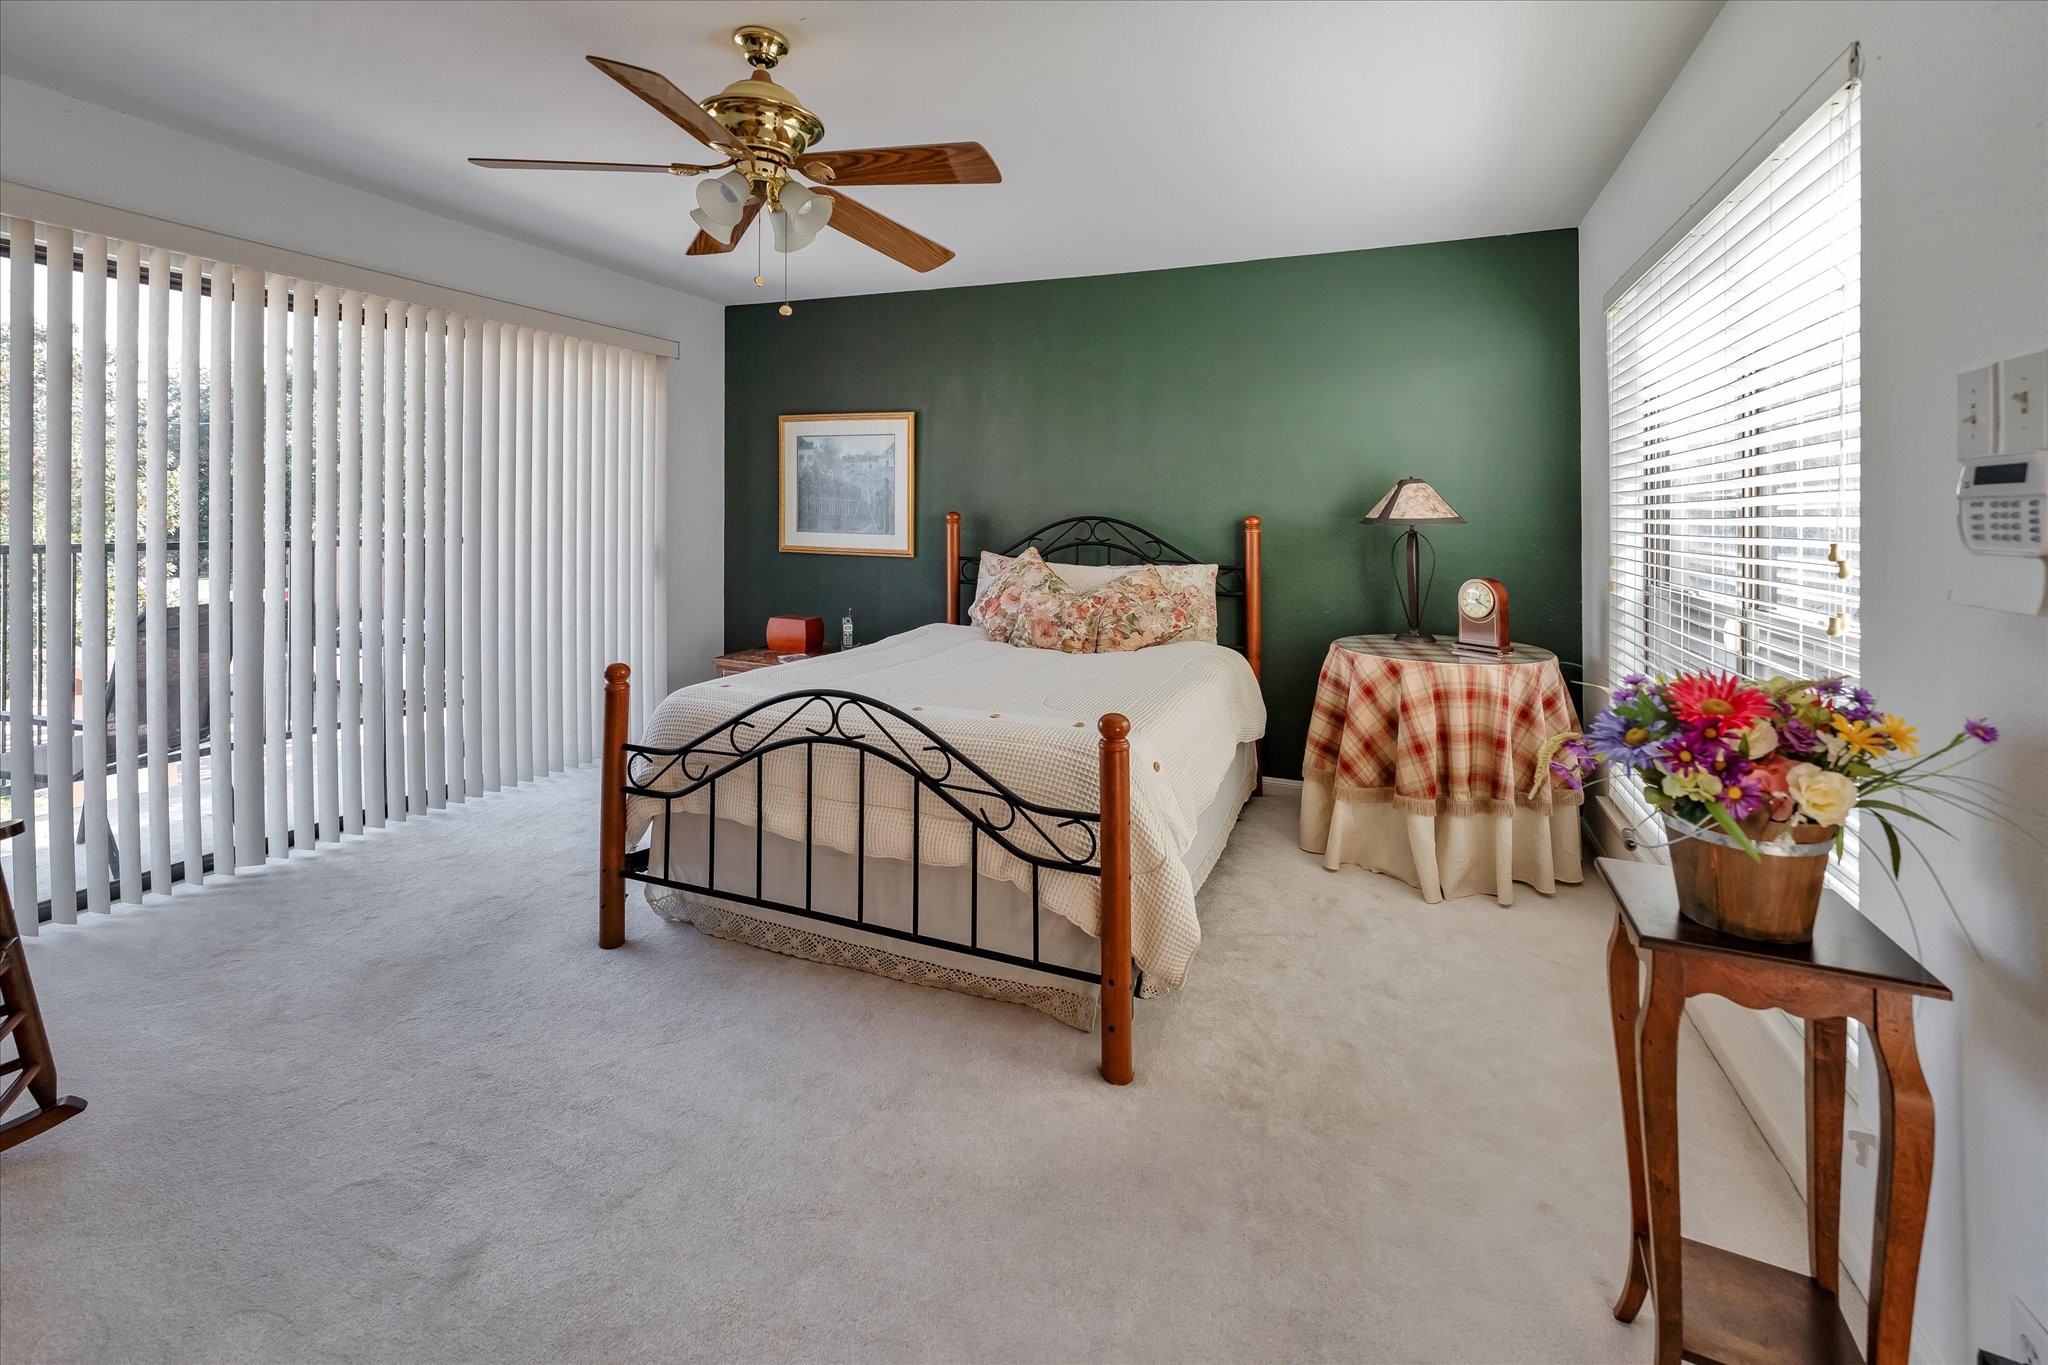 Here's your luxurious primary bedroom located on the 2nd floor, featured by a private balcony, spacious layout and tasteful finishes, with plush carpeting, and large windows framing views of the outdoor greenery.